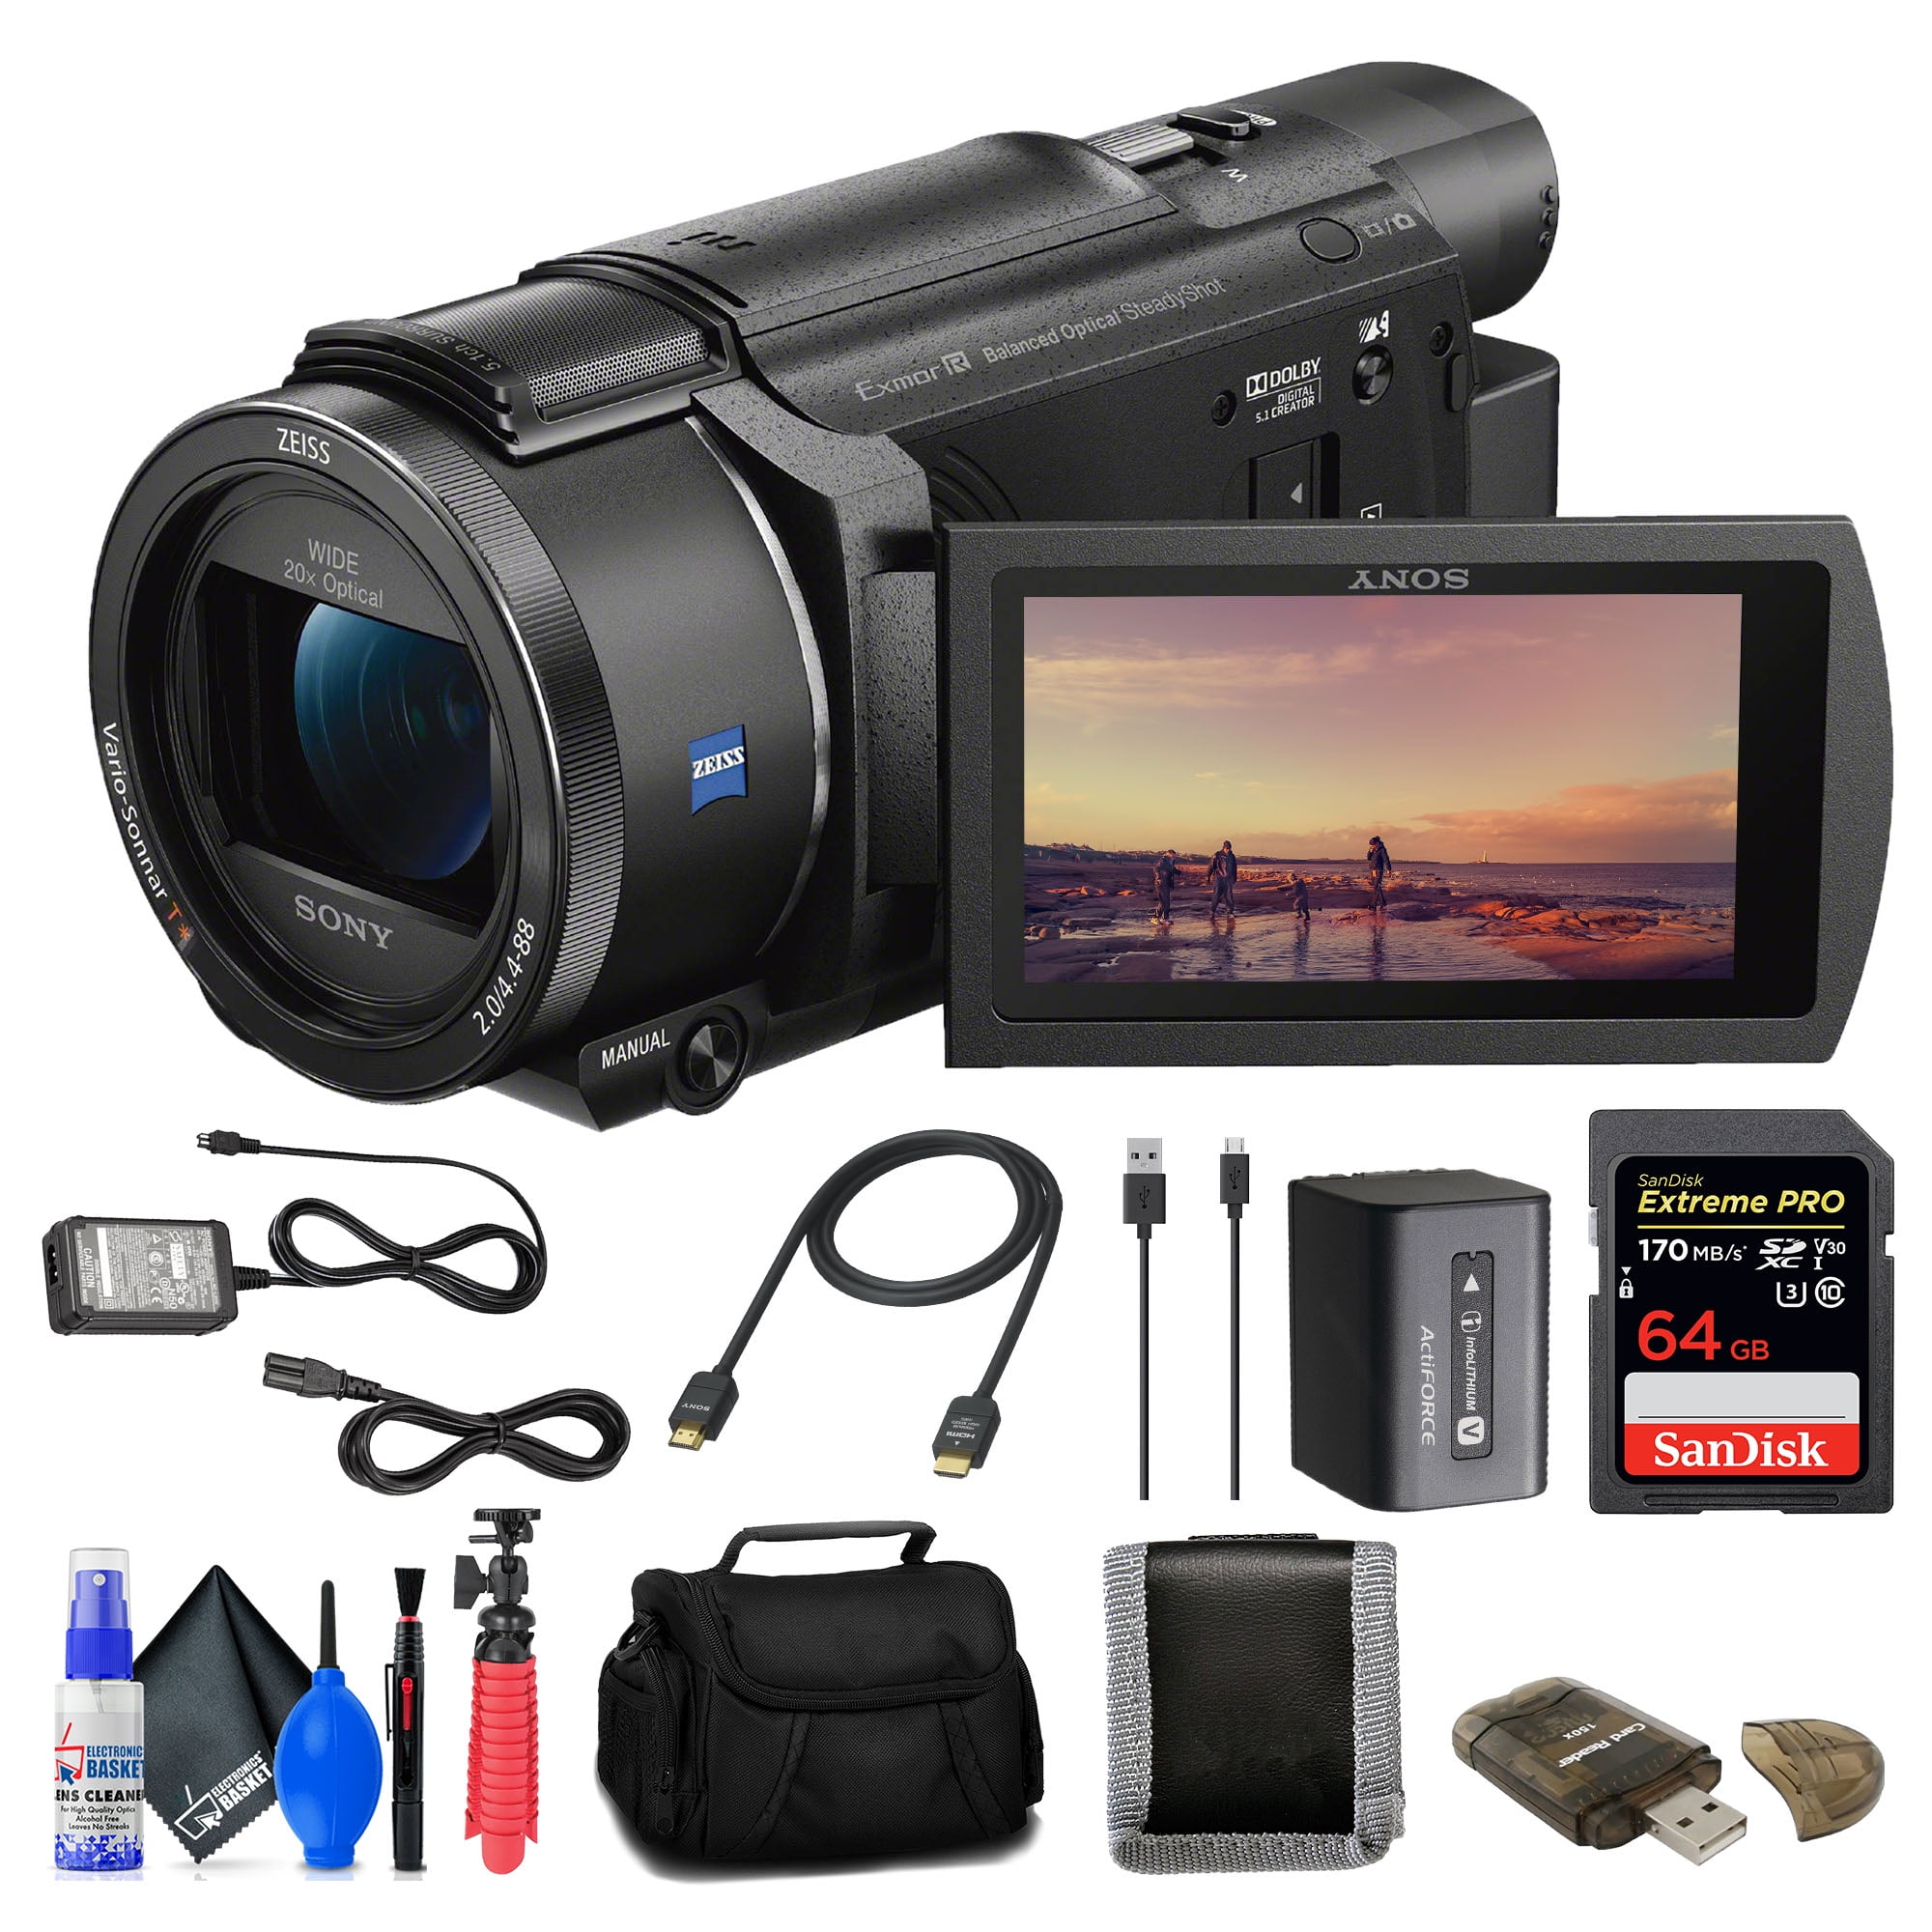 Dodd Camera - SONY FDR AX53 Digital 4k Camcorder with 20x Zeiss lens